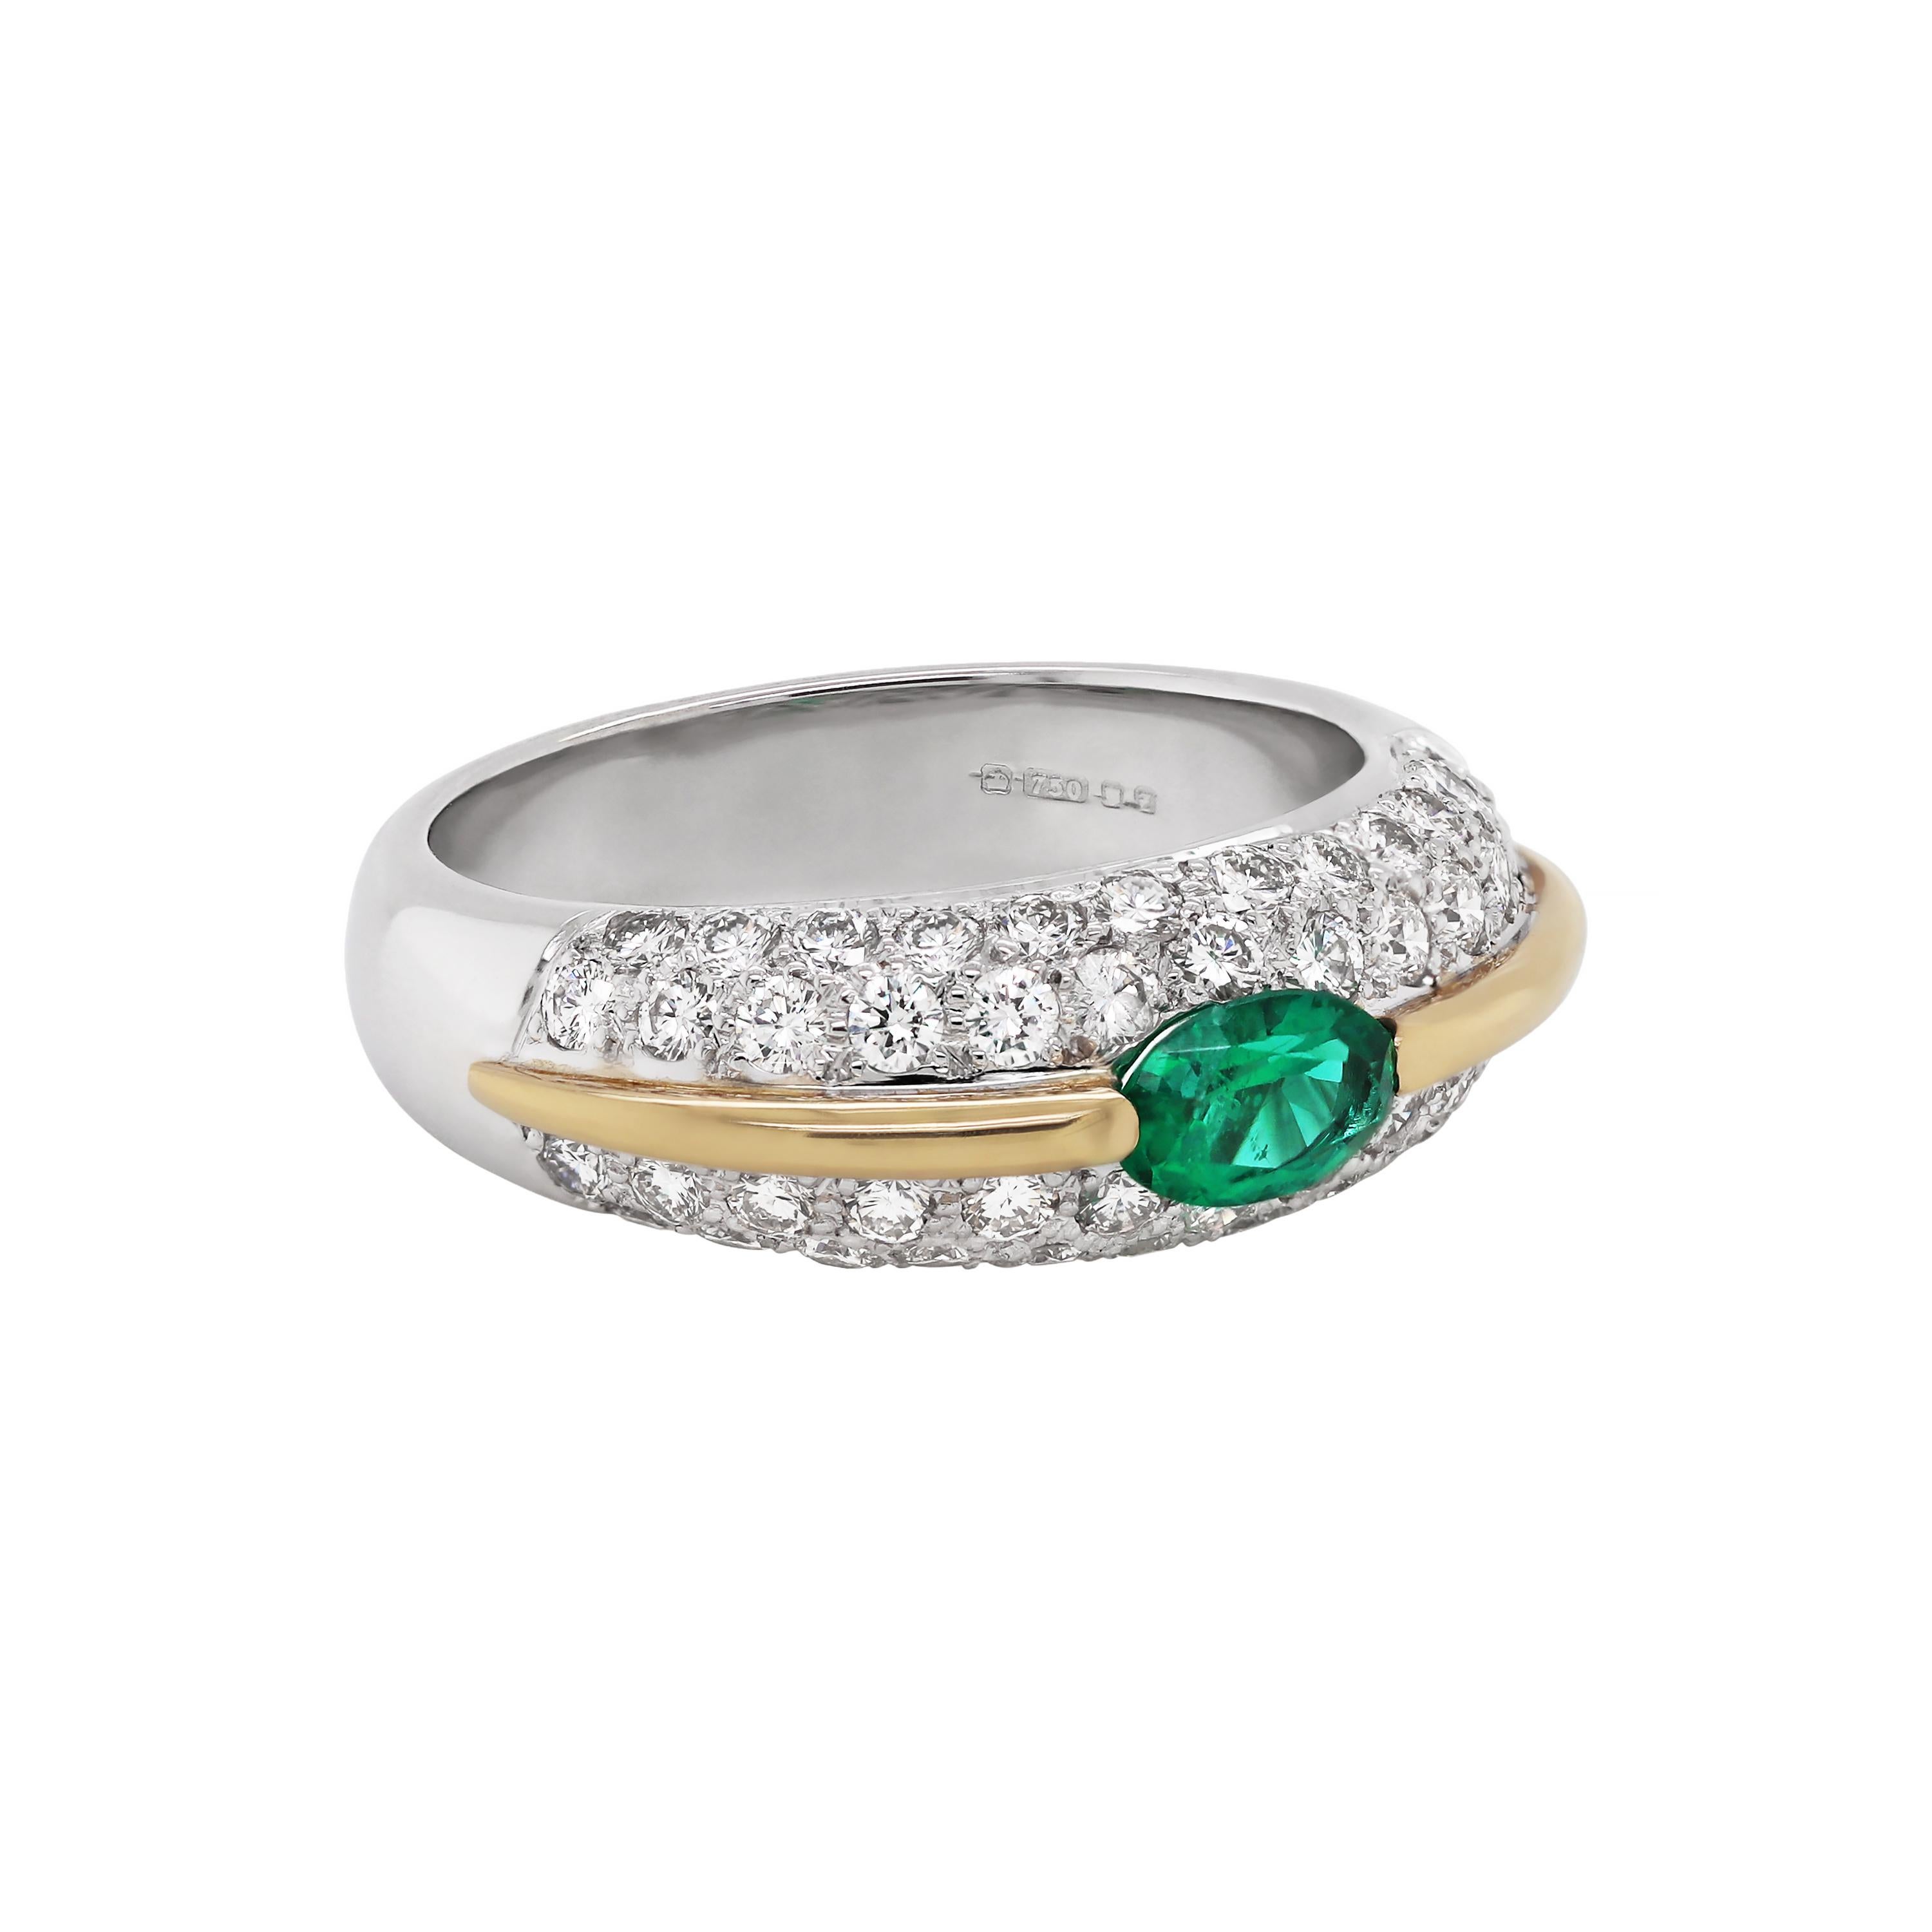 This contemporary small bombé cluster ring features a tension set oval emerald weighing 0.35ct in the center of a diamond pavé set mount. The ring is beautifully designed with a contrasting 18 carat yellow gold divide, set two rows of round